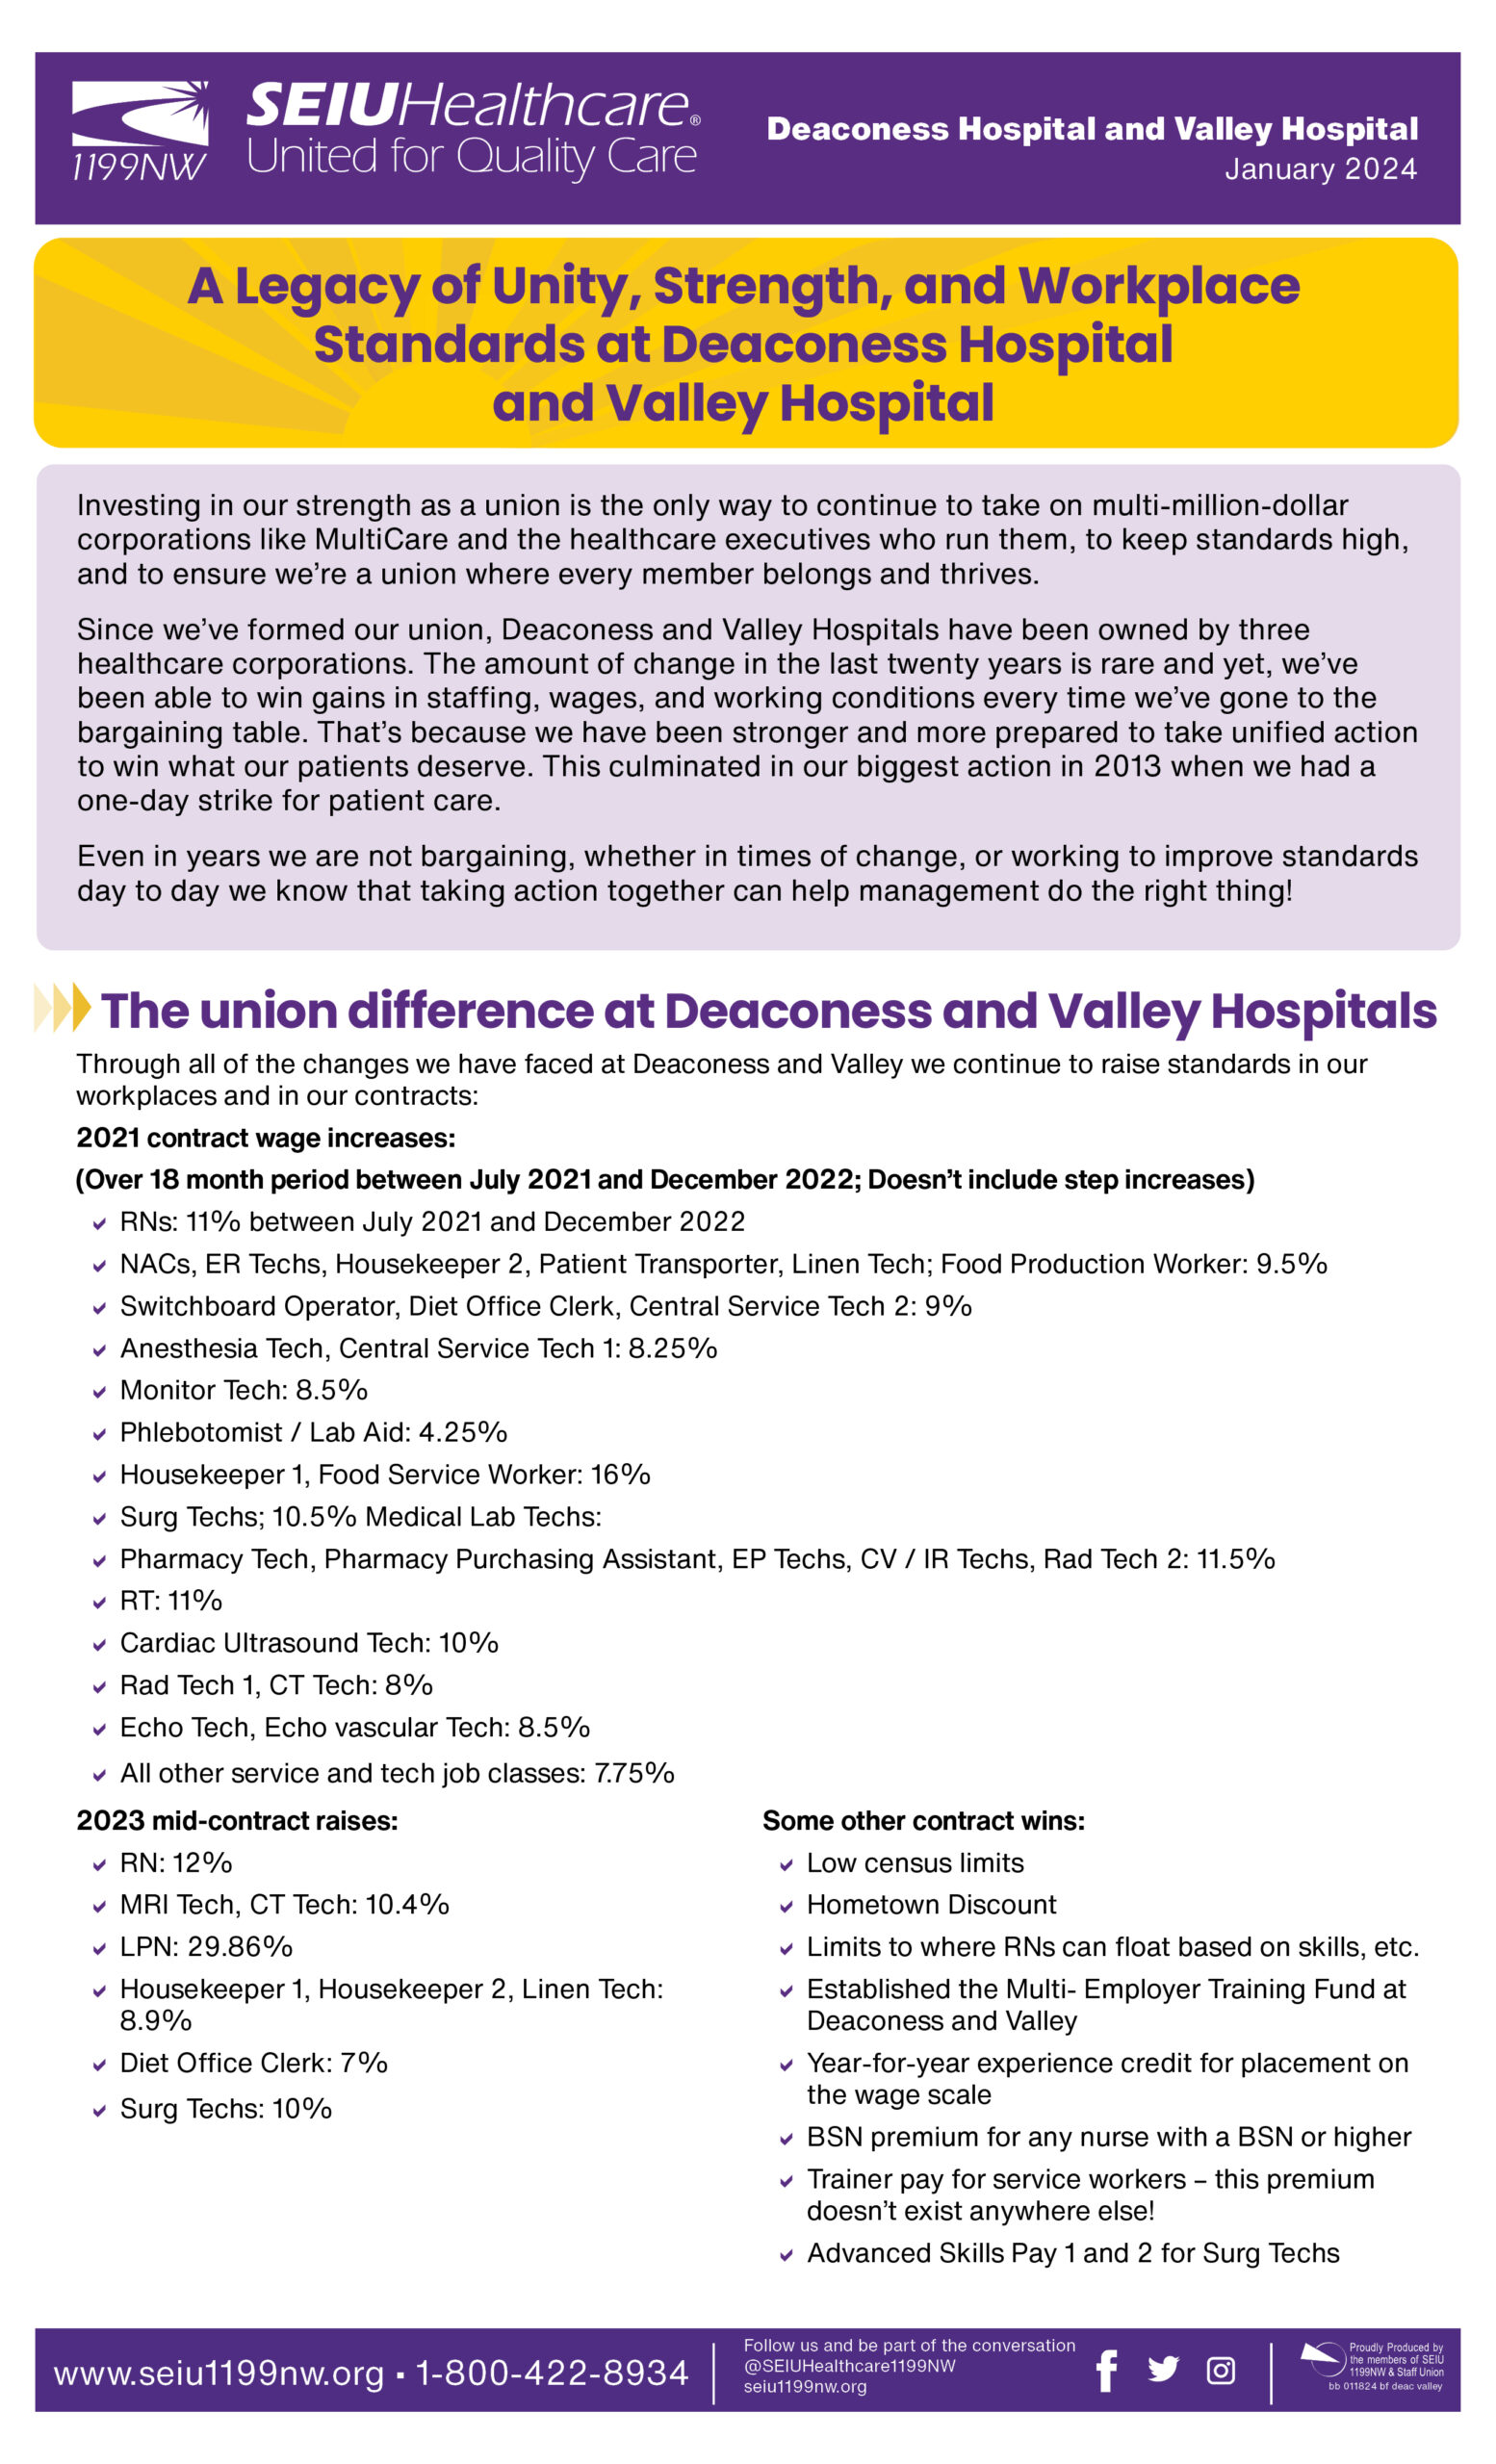 A Legacy of Unity, Strength, and Workplace Standards at Deaconess Hospital and Valley Hospital